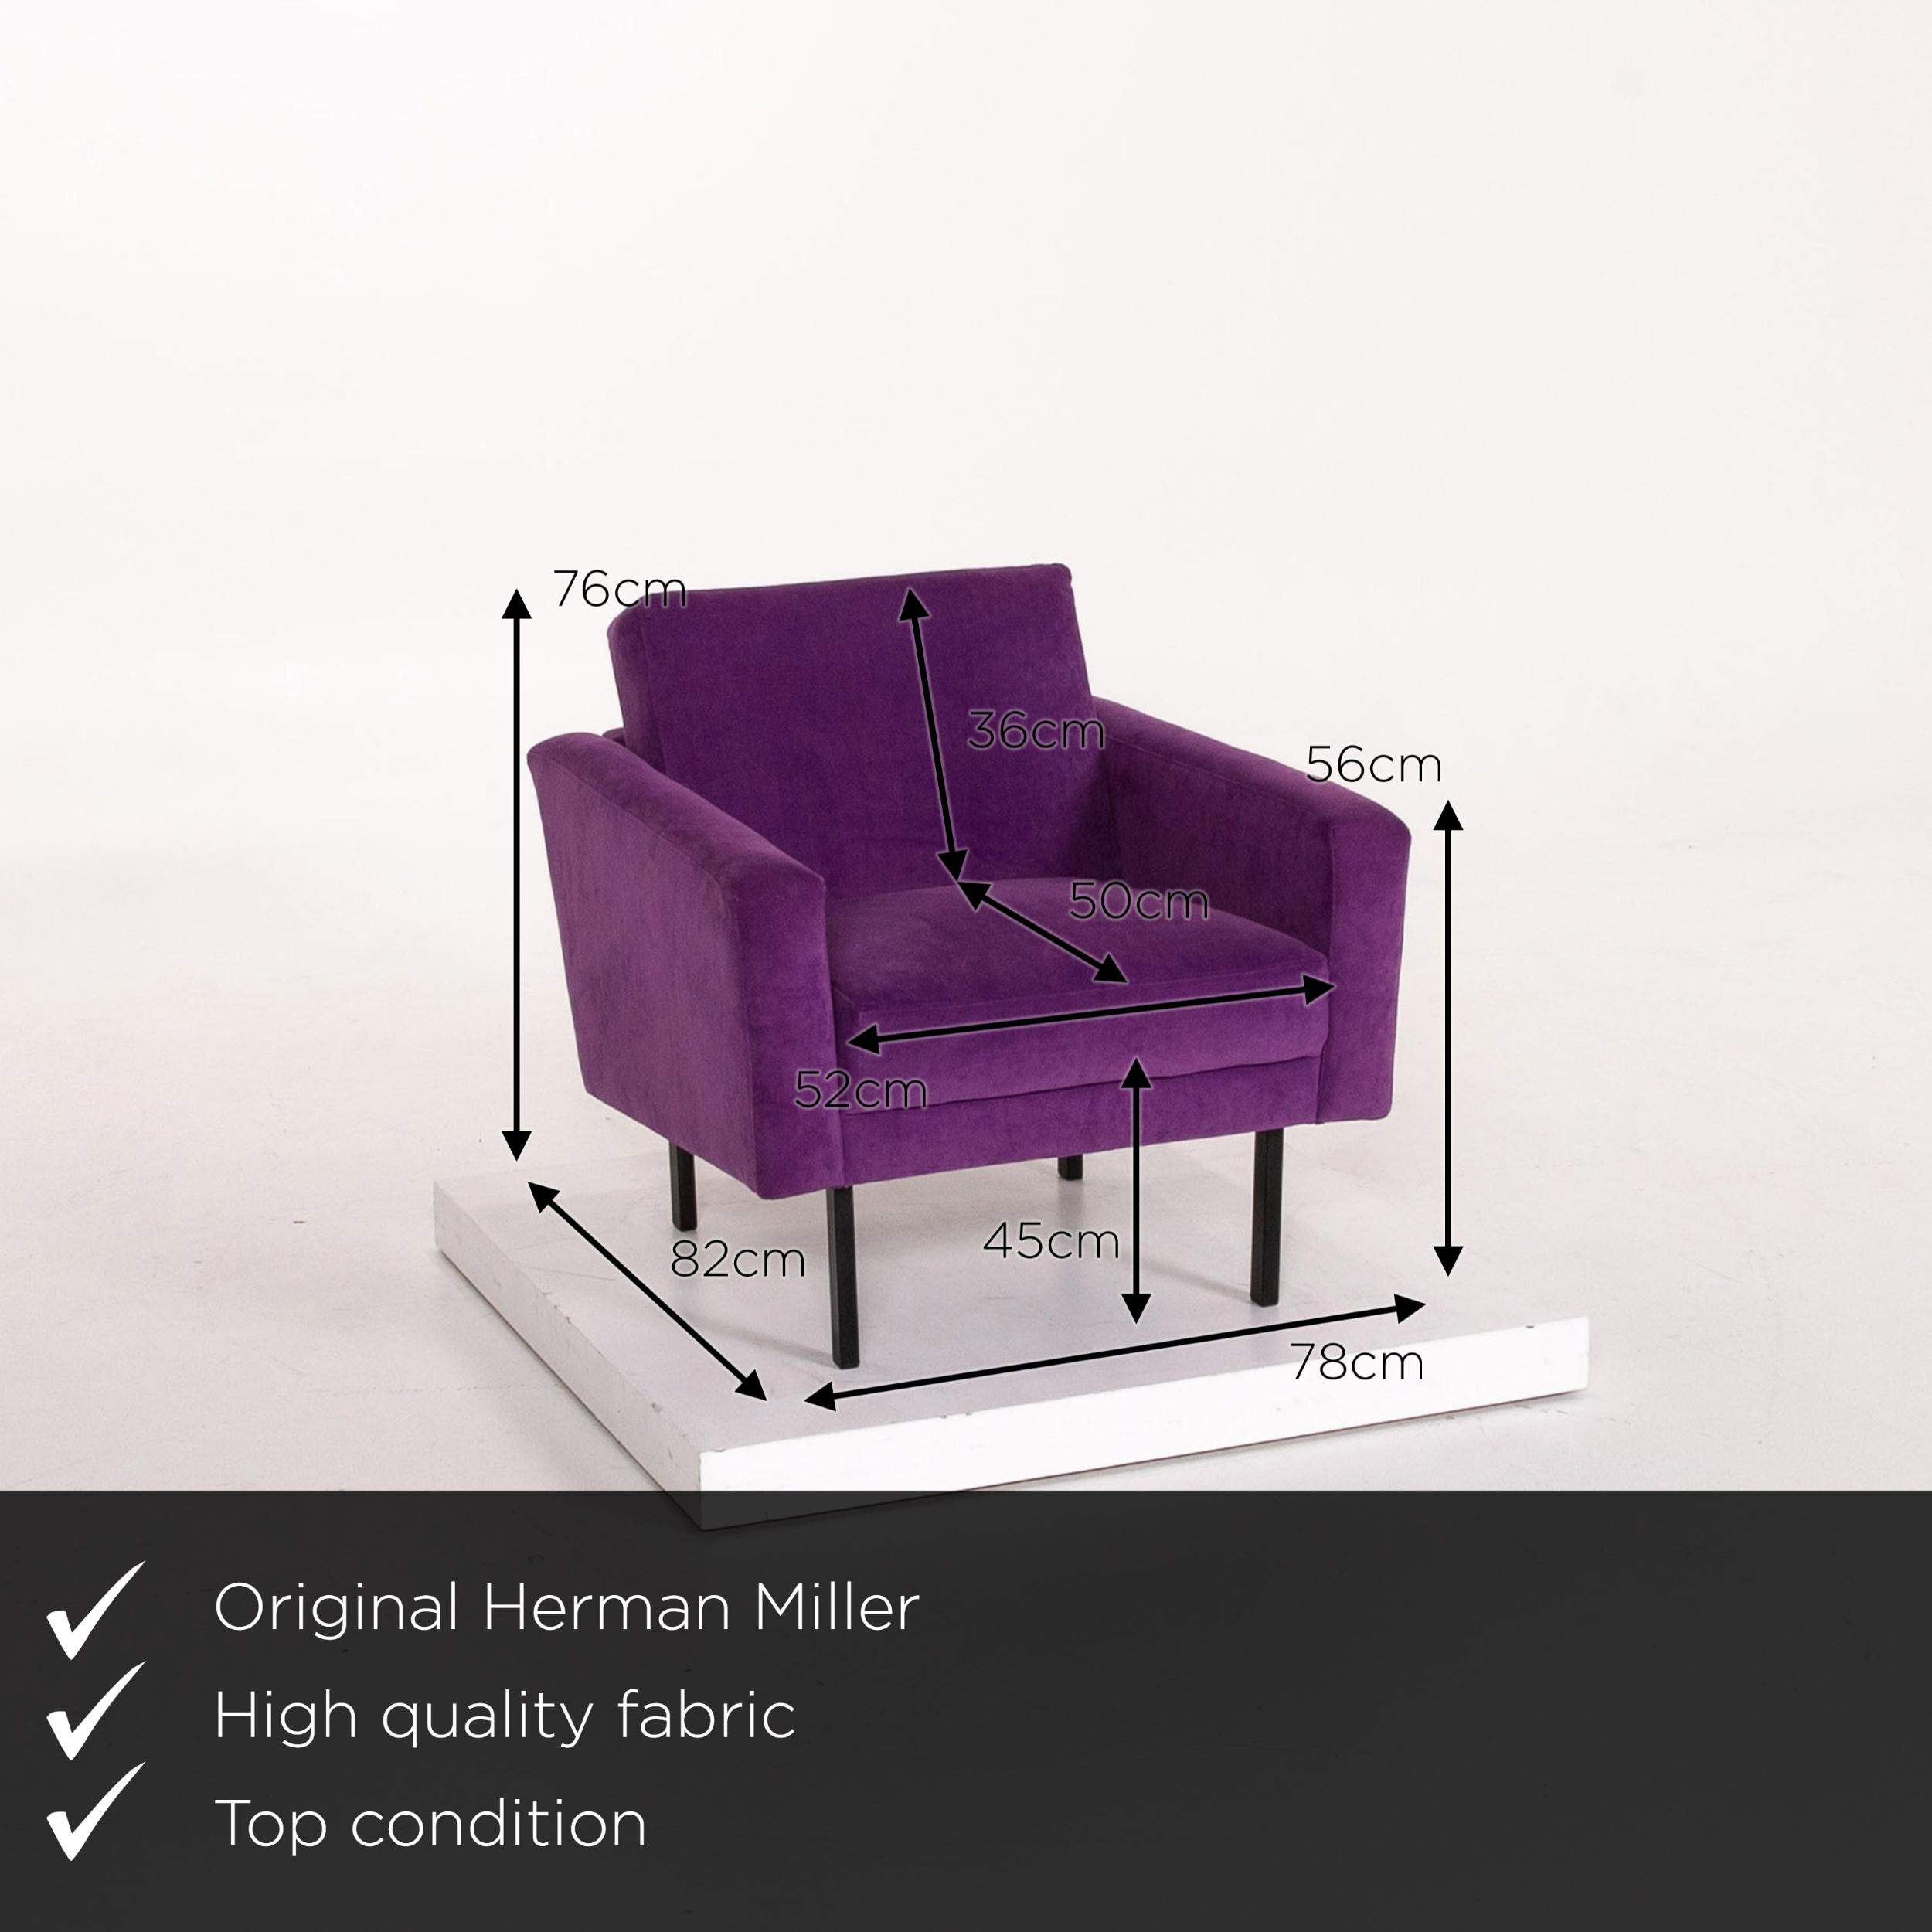 We present to you a Herman Miller fabric armchair purple.

Product measurements in centimeters:

Depth 82
Width 78
Height 76
Seat height 45
Rest height 56
Seat depth 50
Seat width 52
Back height 36.
 
 
 
    